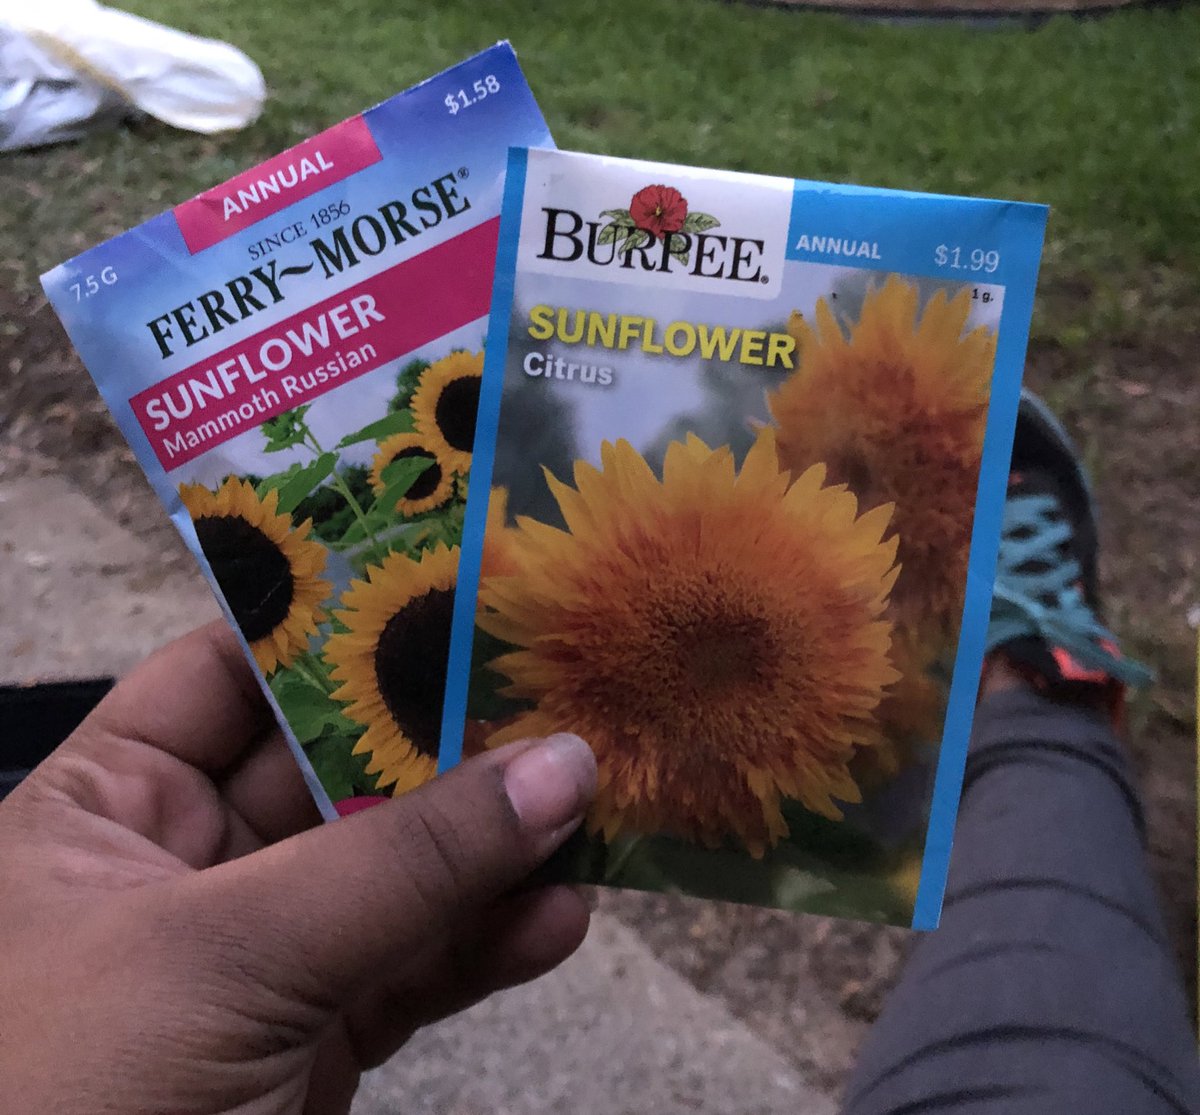 My friend offered to let me grow more sunflowers in her backyard so we’re planting the real thing: Russian mammoths & citrus sunflowers.Mammoths can grow up to 15” tall with flower heads reaching 1” wide. Citrus sunflowers are double blooms and grow up to 6” tall!